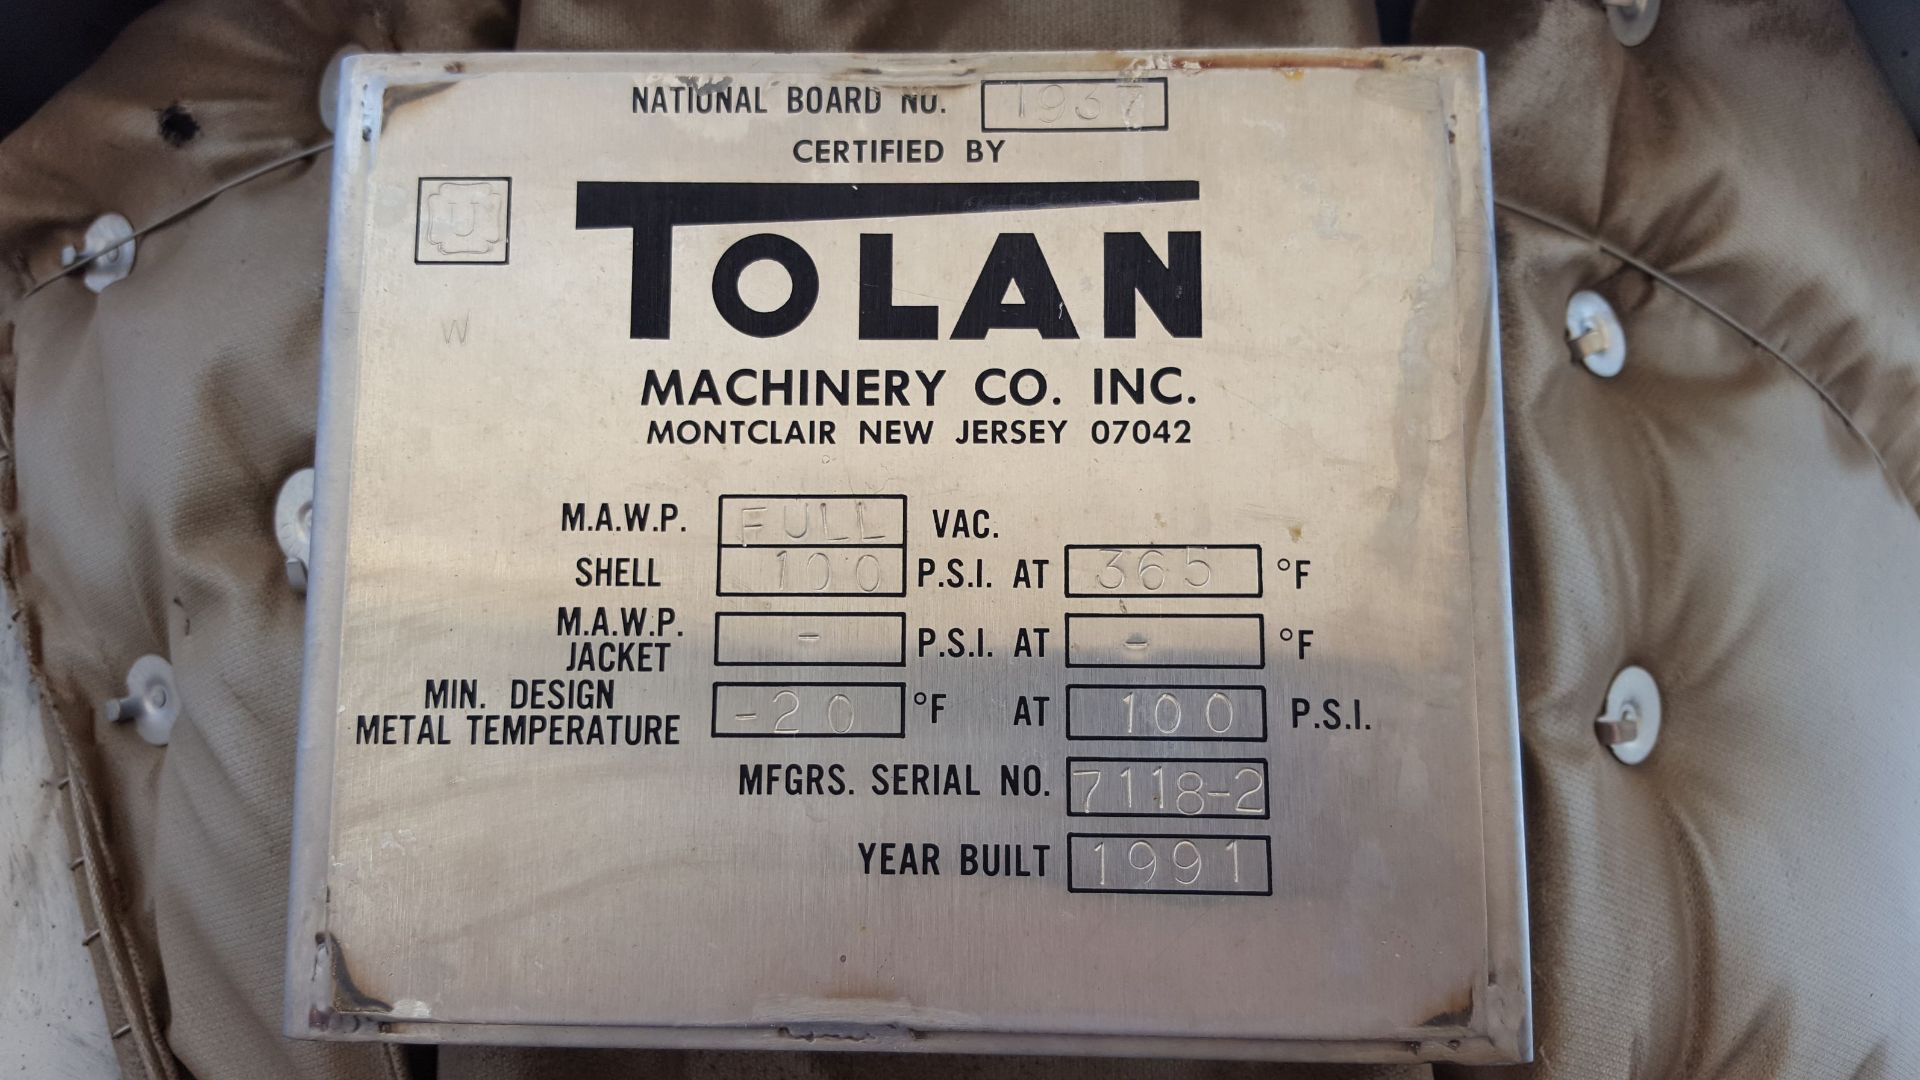 Tolan Machinery Co. Stainless Steel Vessel, 42" straight side x 21" dia. - Image 4 of 6